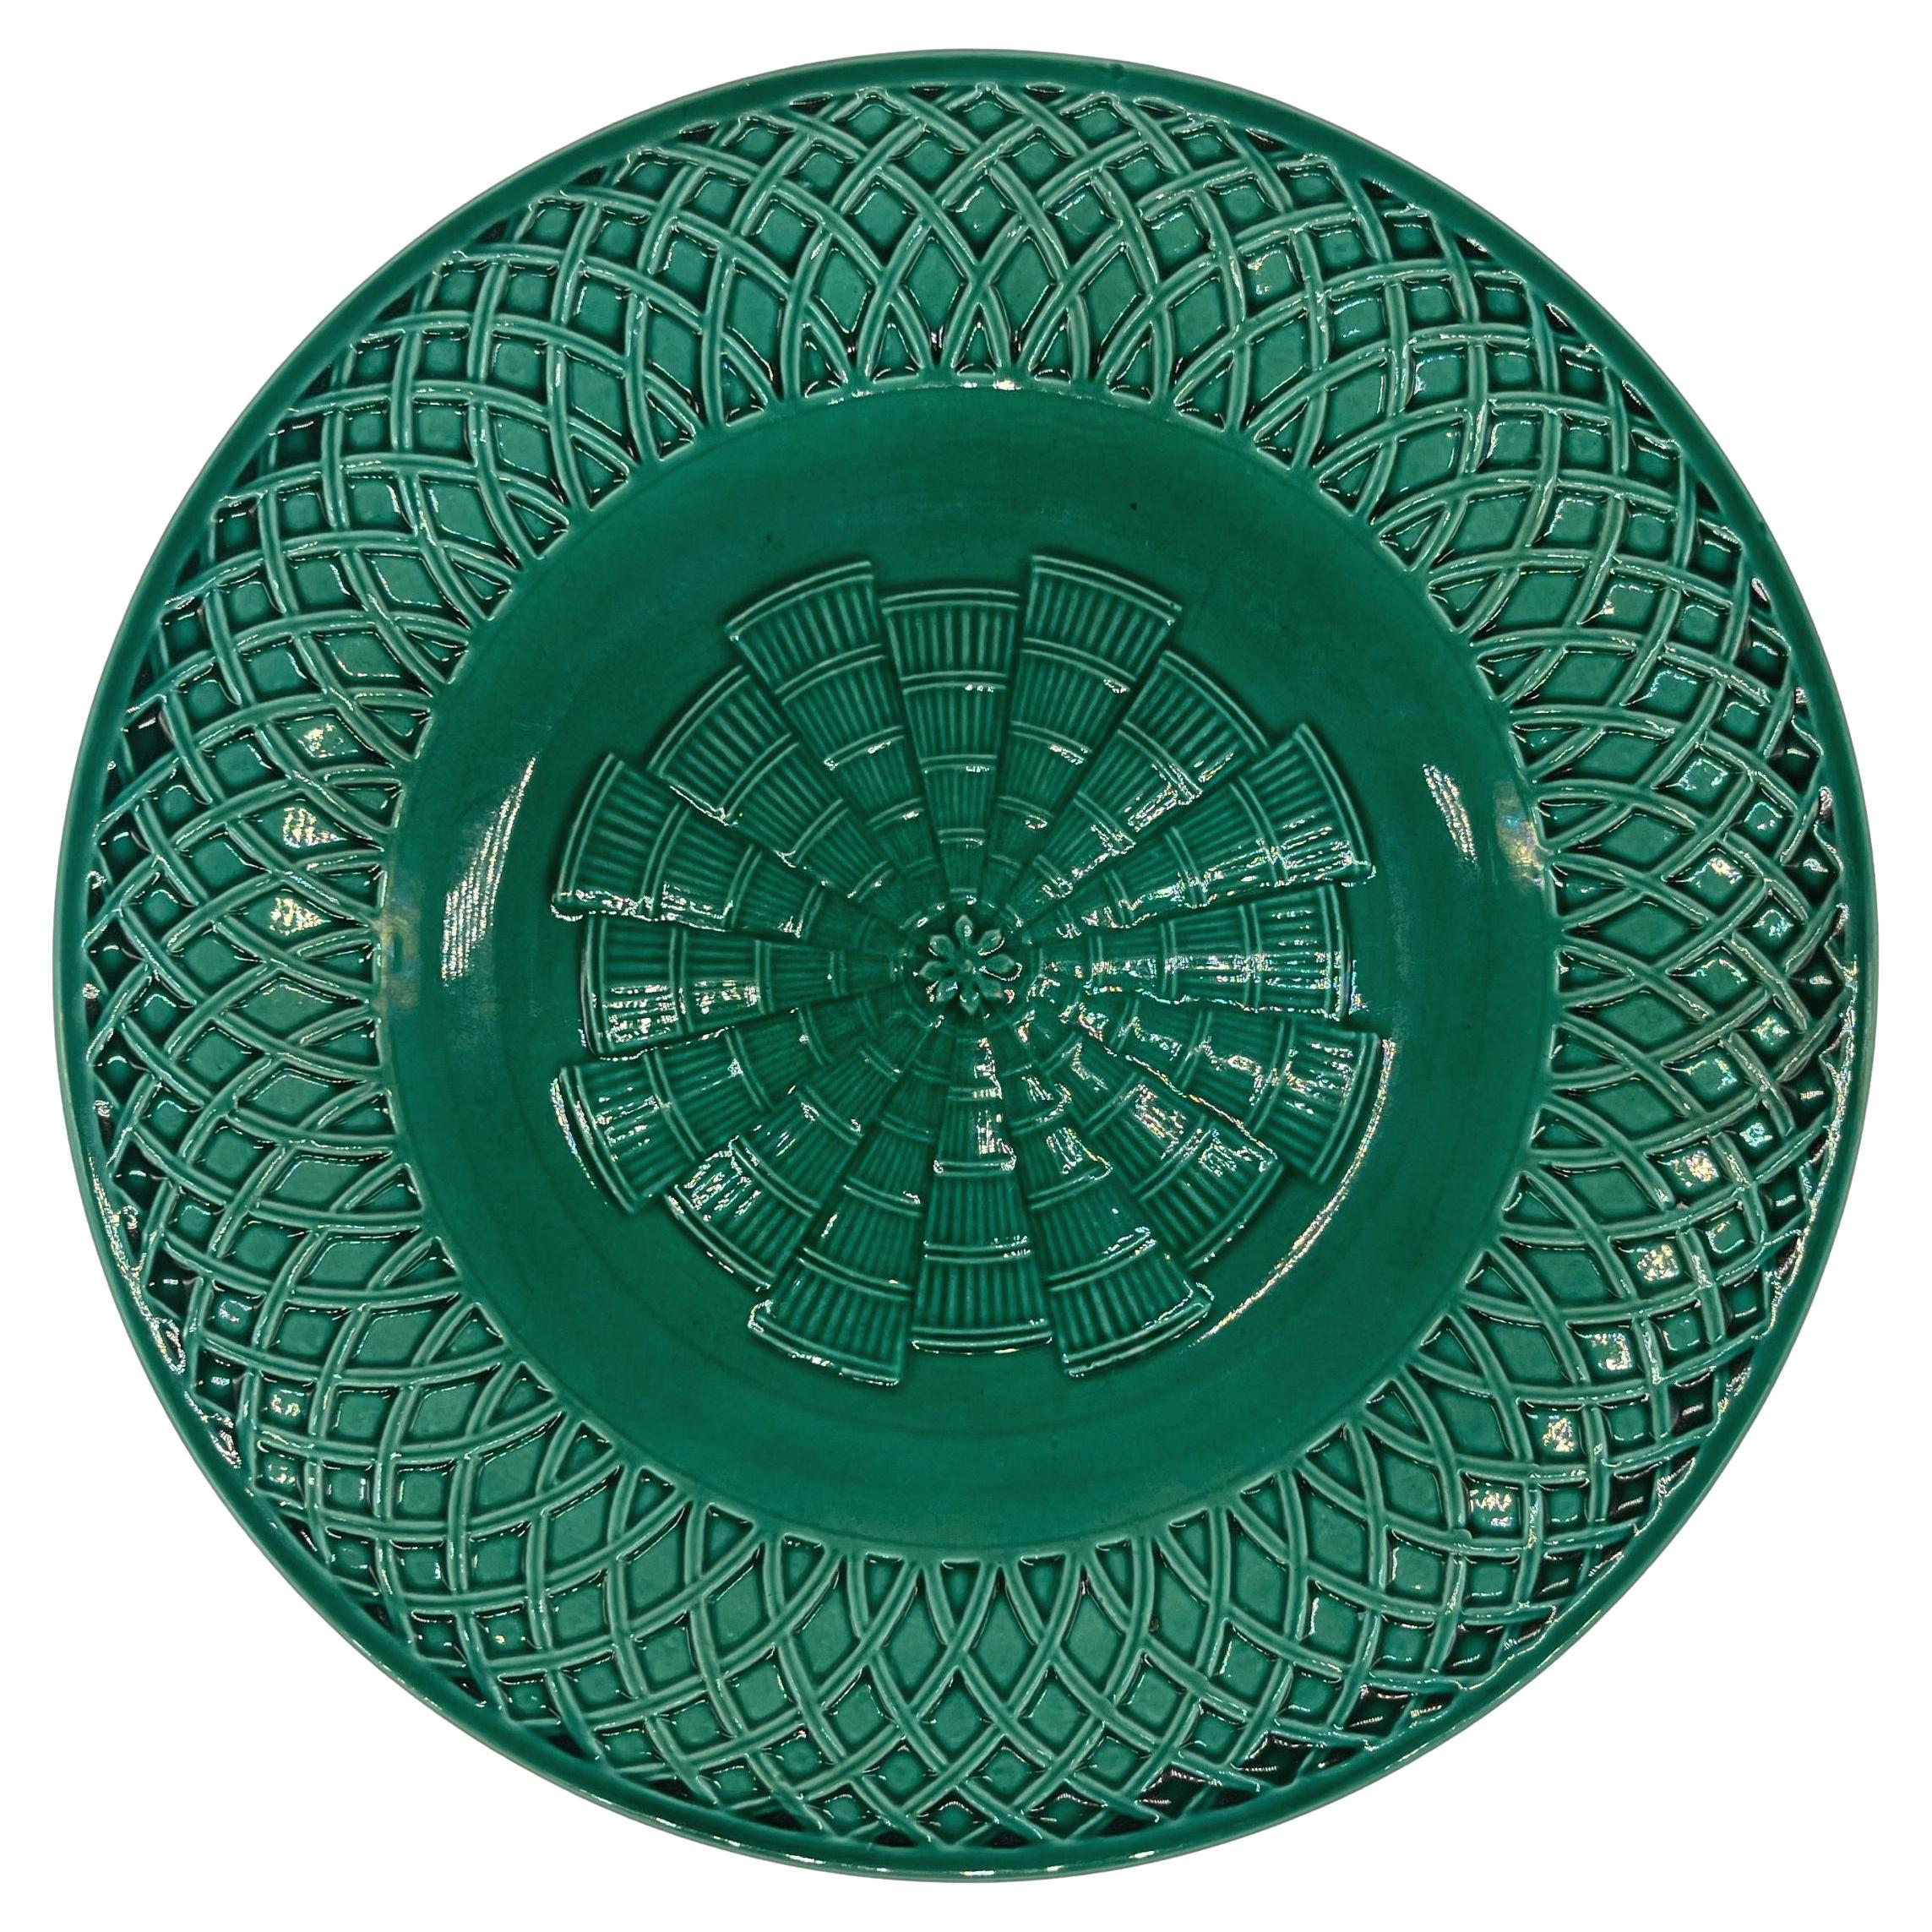 Minton Majolica Émail Ombrant Lattice Green Plate, English, Dated 1872